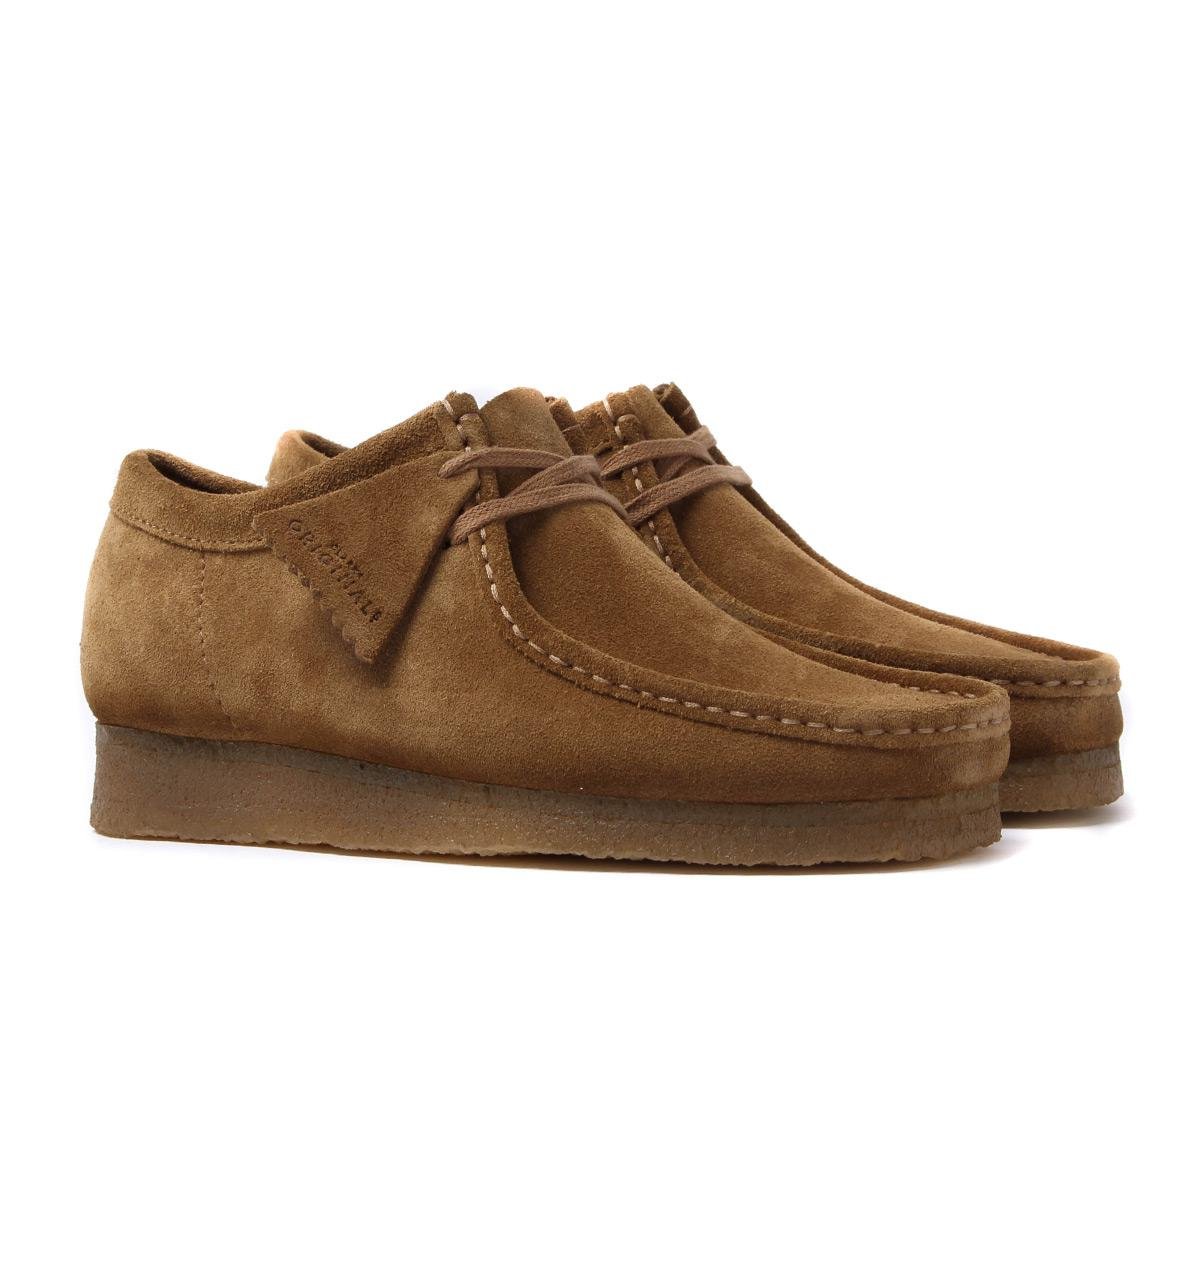 Clarks Wallabee Cola Brown Suede Shoes - Lyst